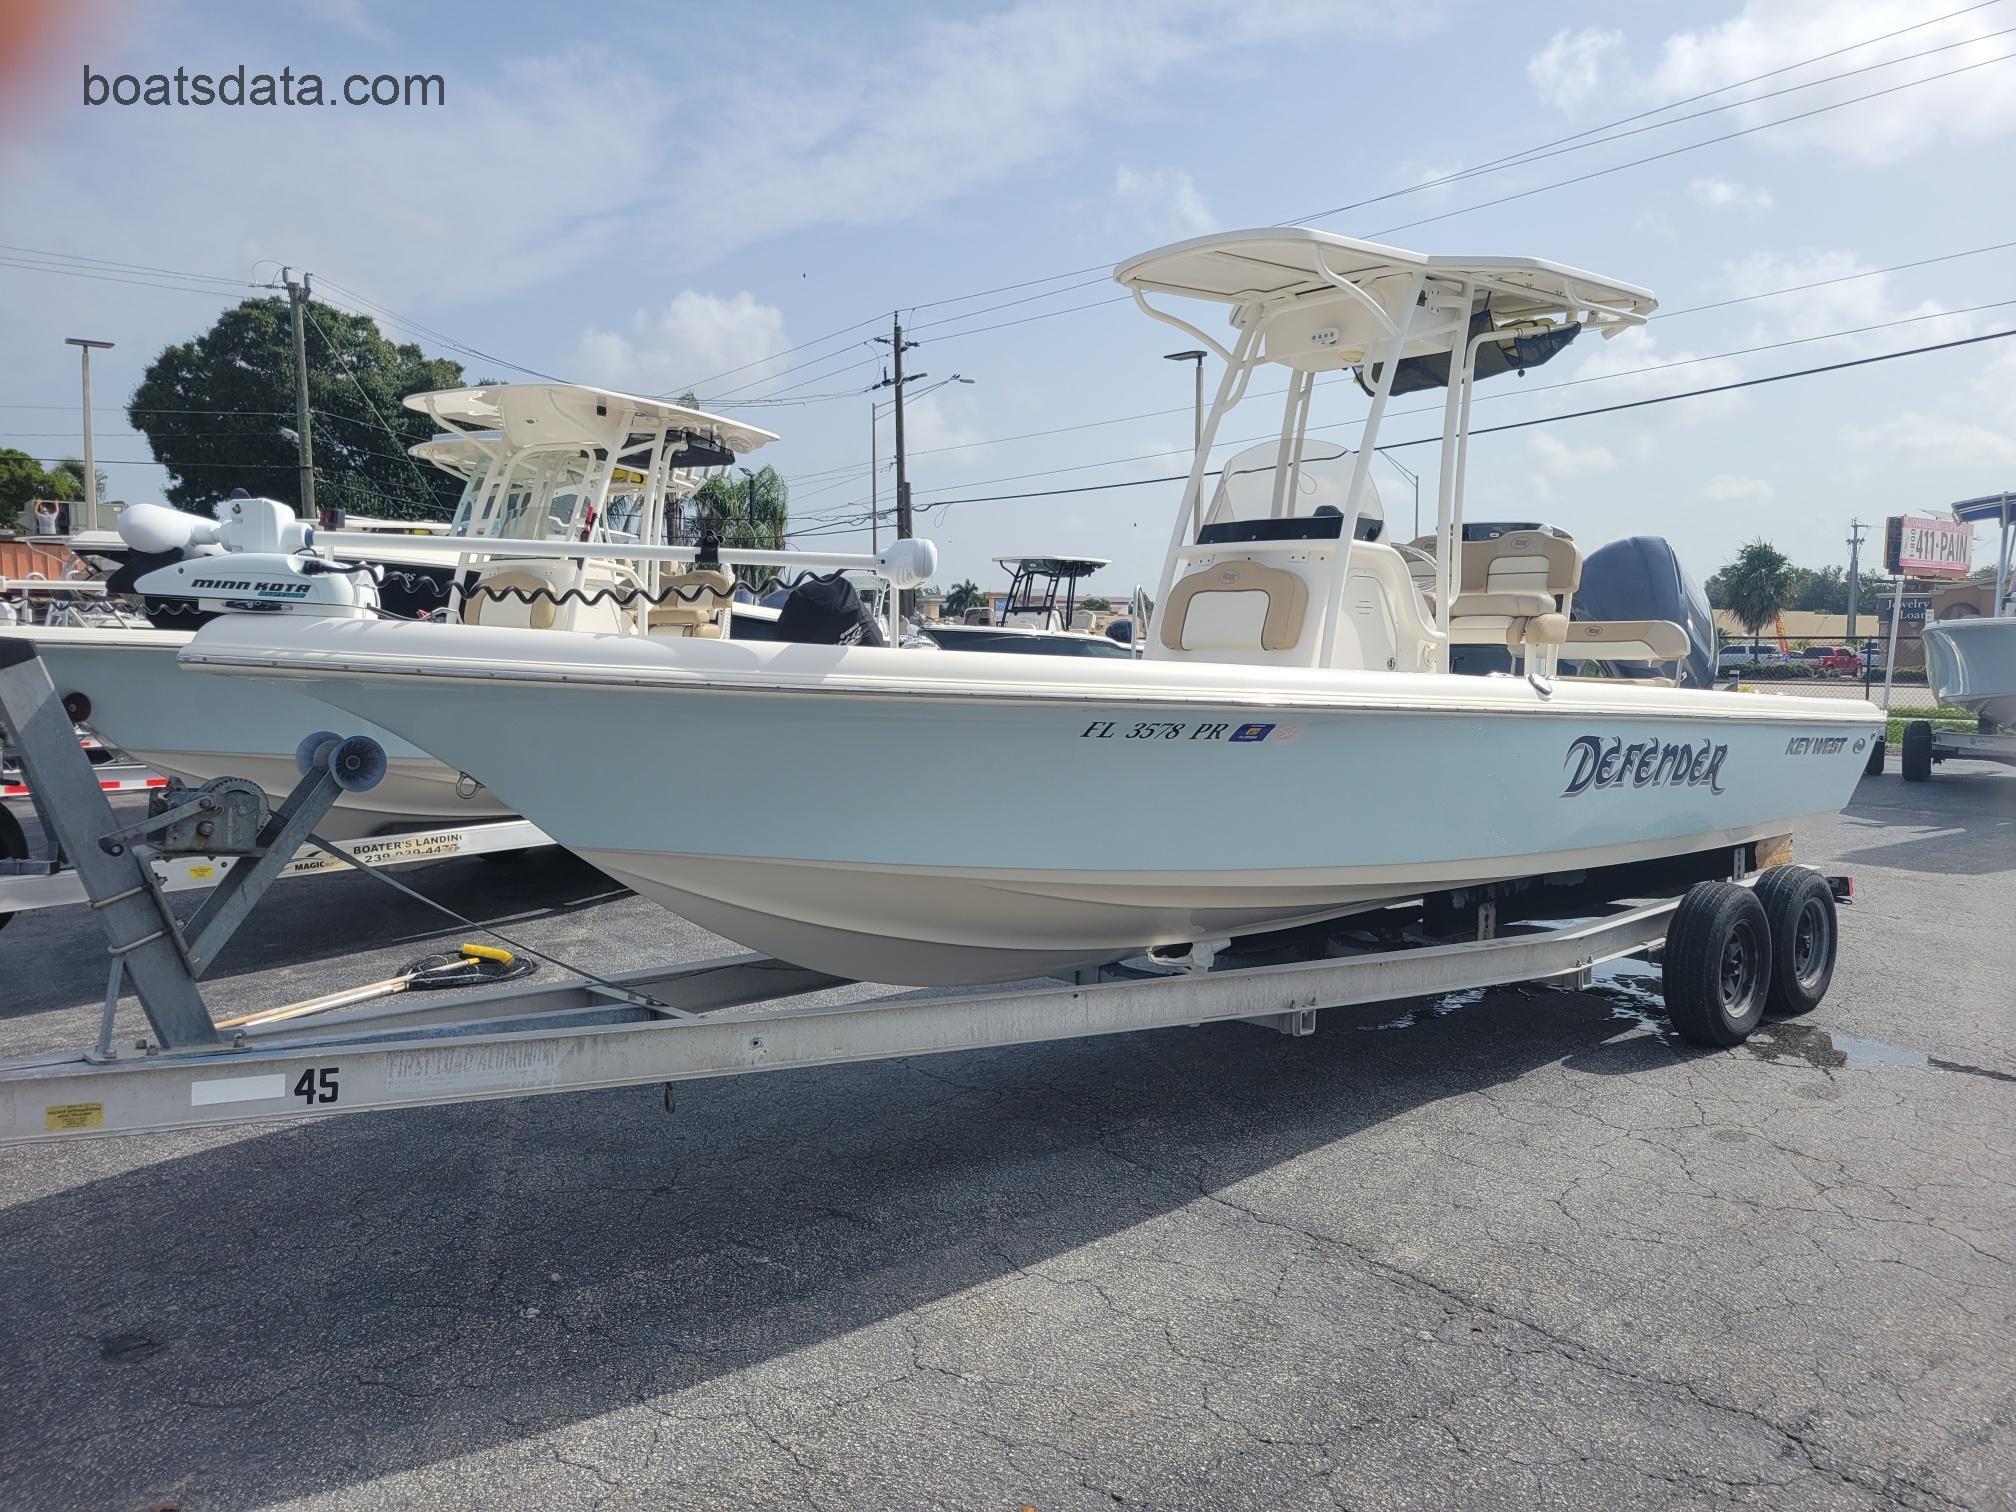 Key West 246 Bay Reef tv detailed specifications and features